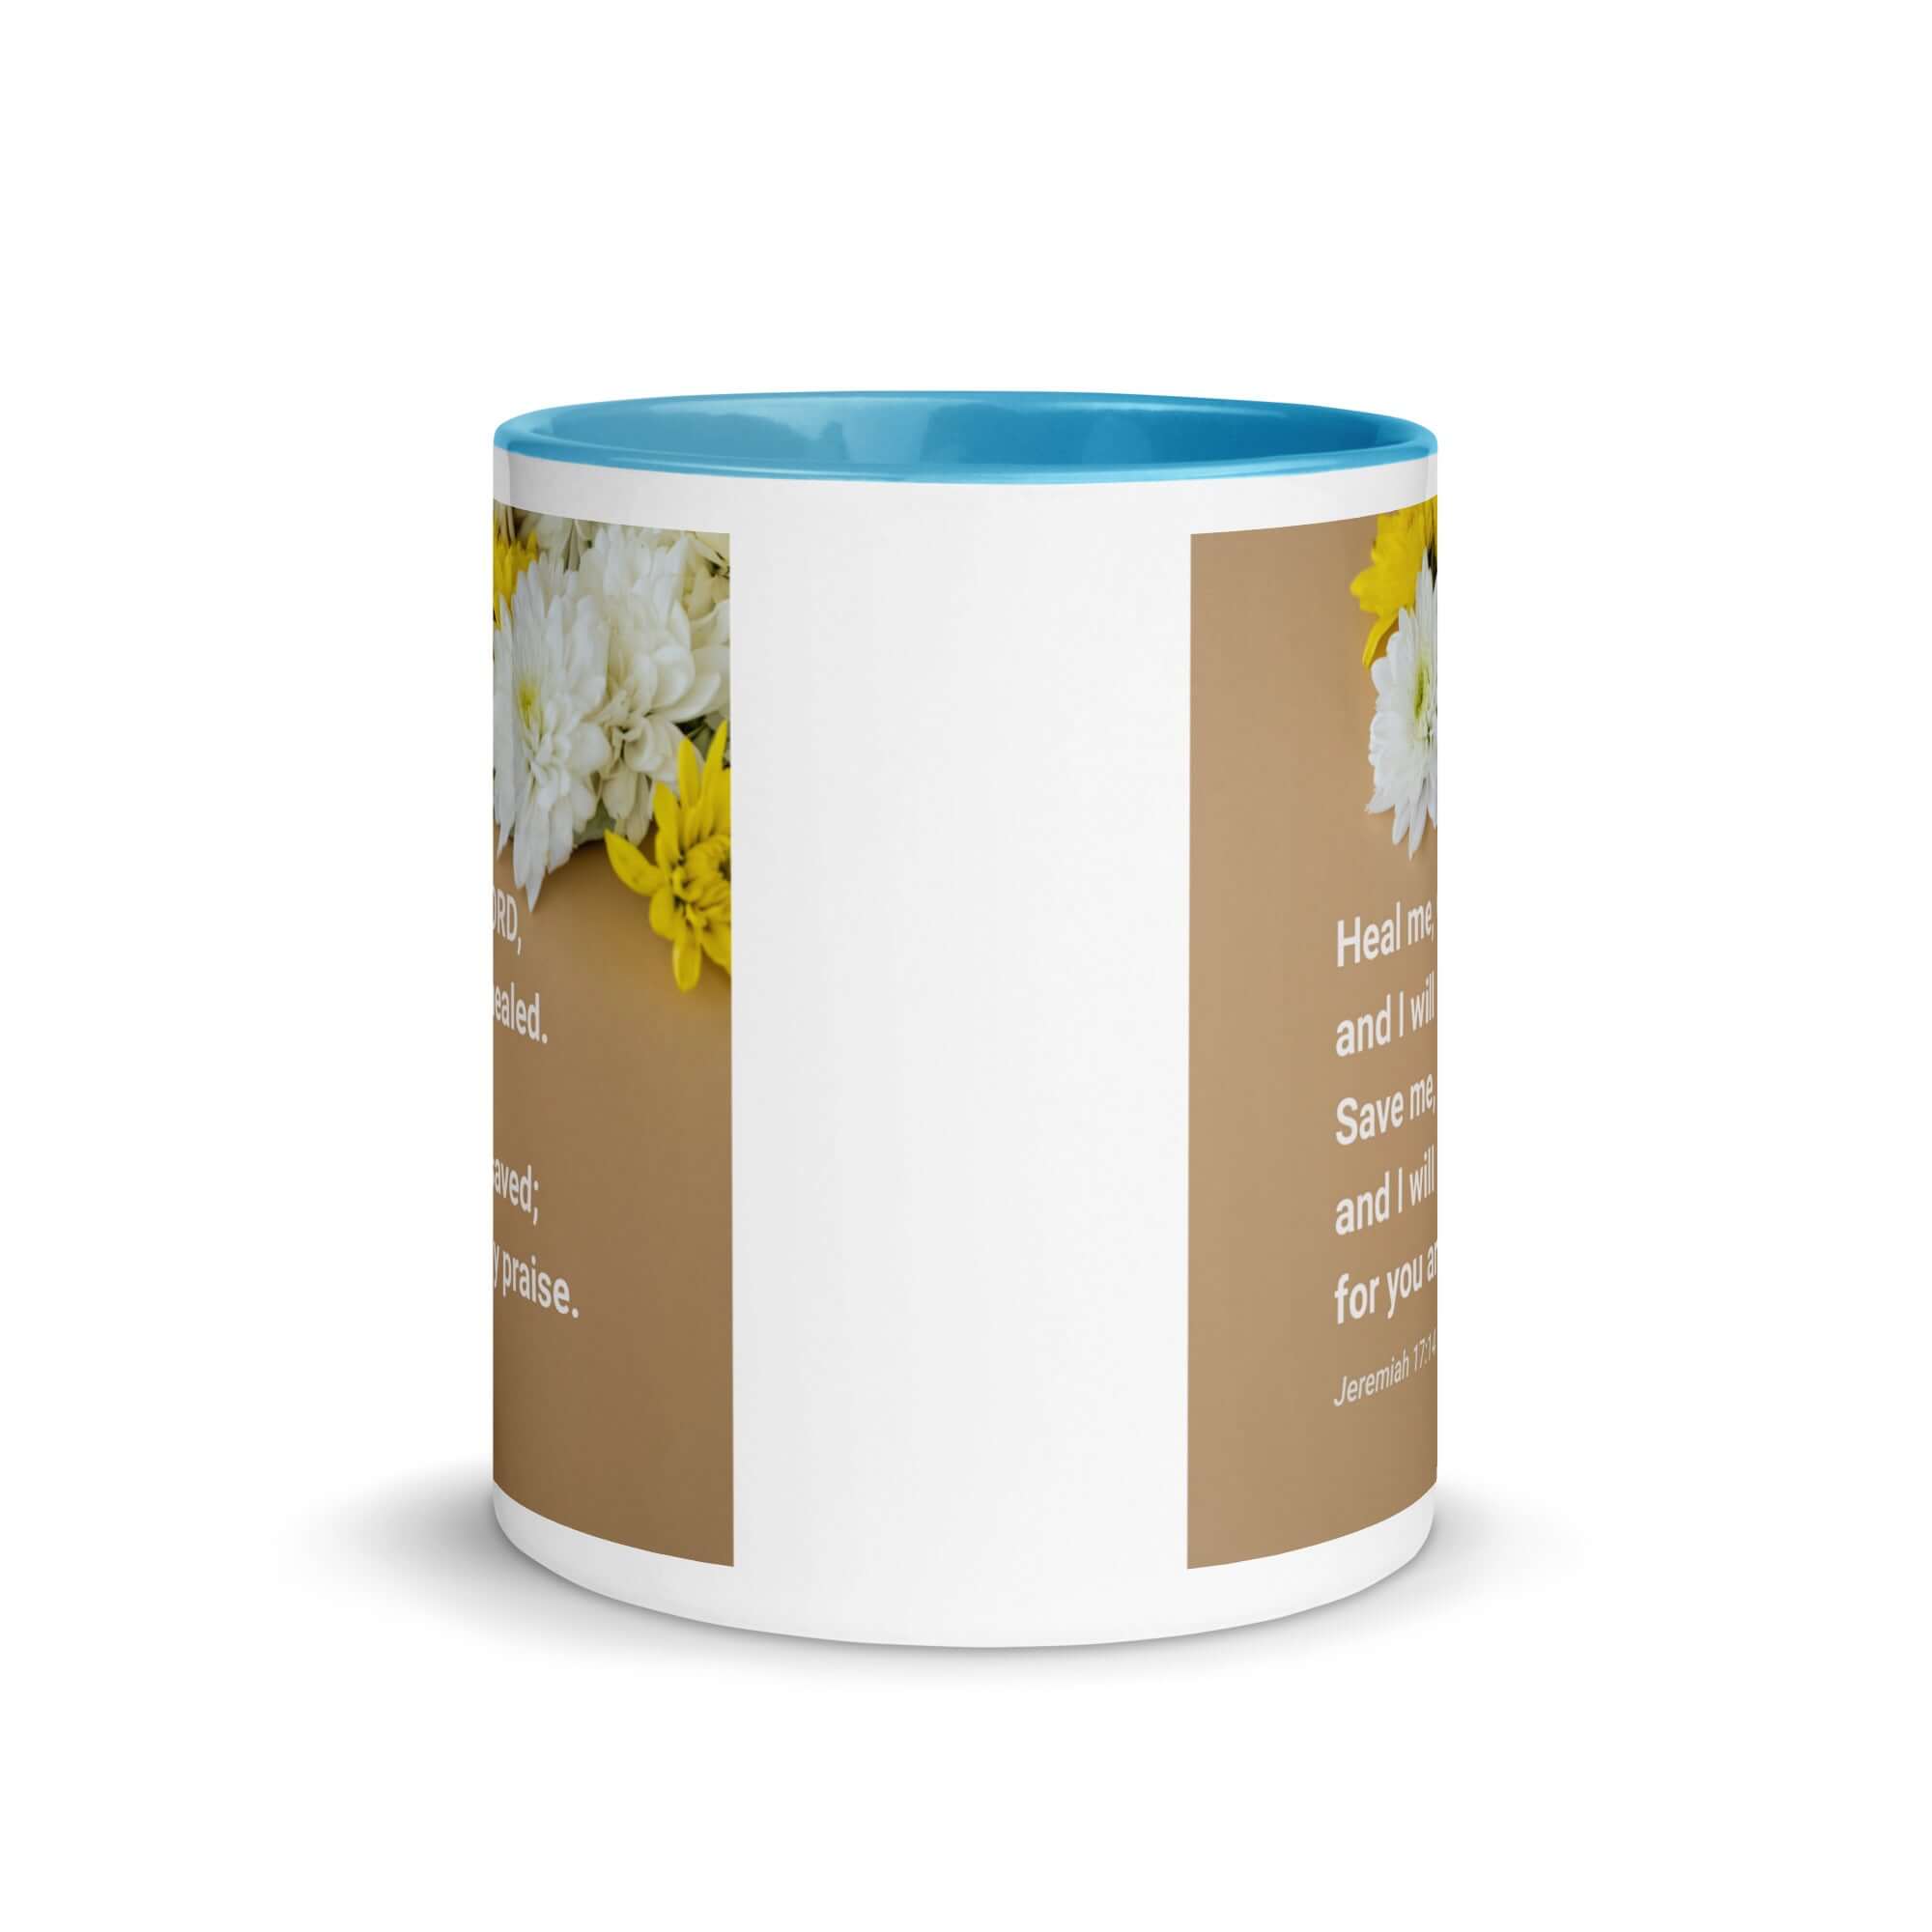 Jer 17:14 - Bible Verse, Heal me, O LORD White Ceramic Mug with Color Inside